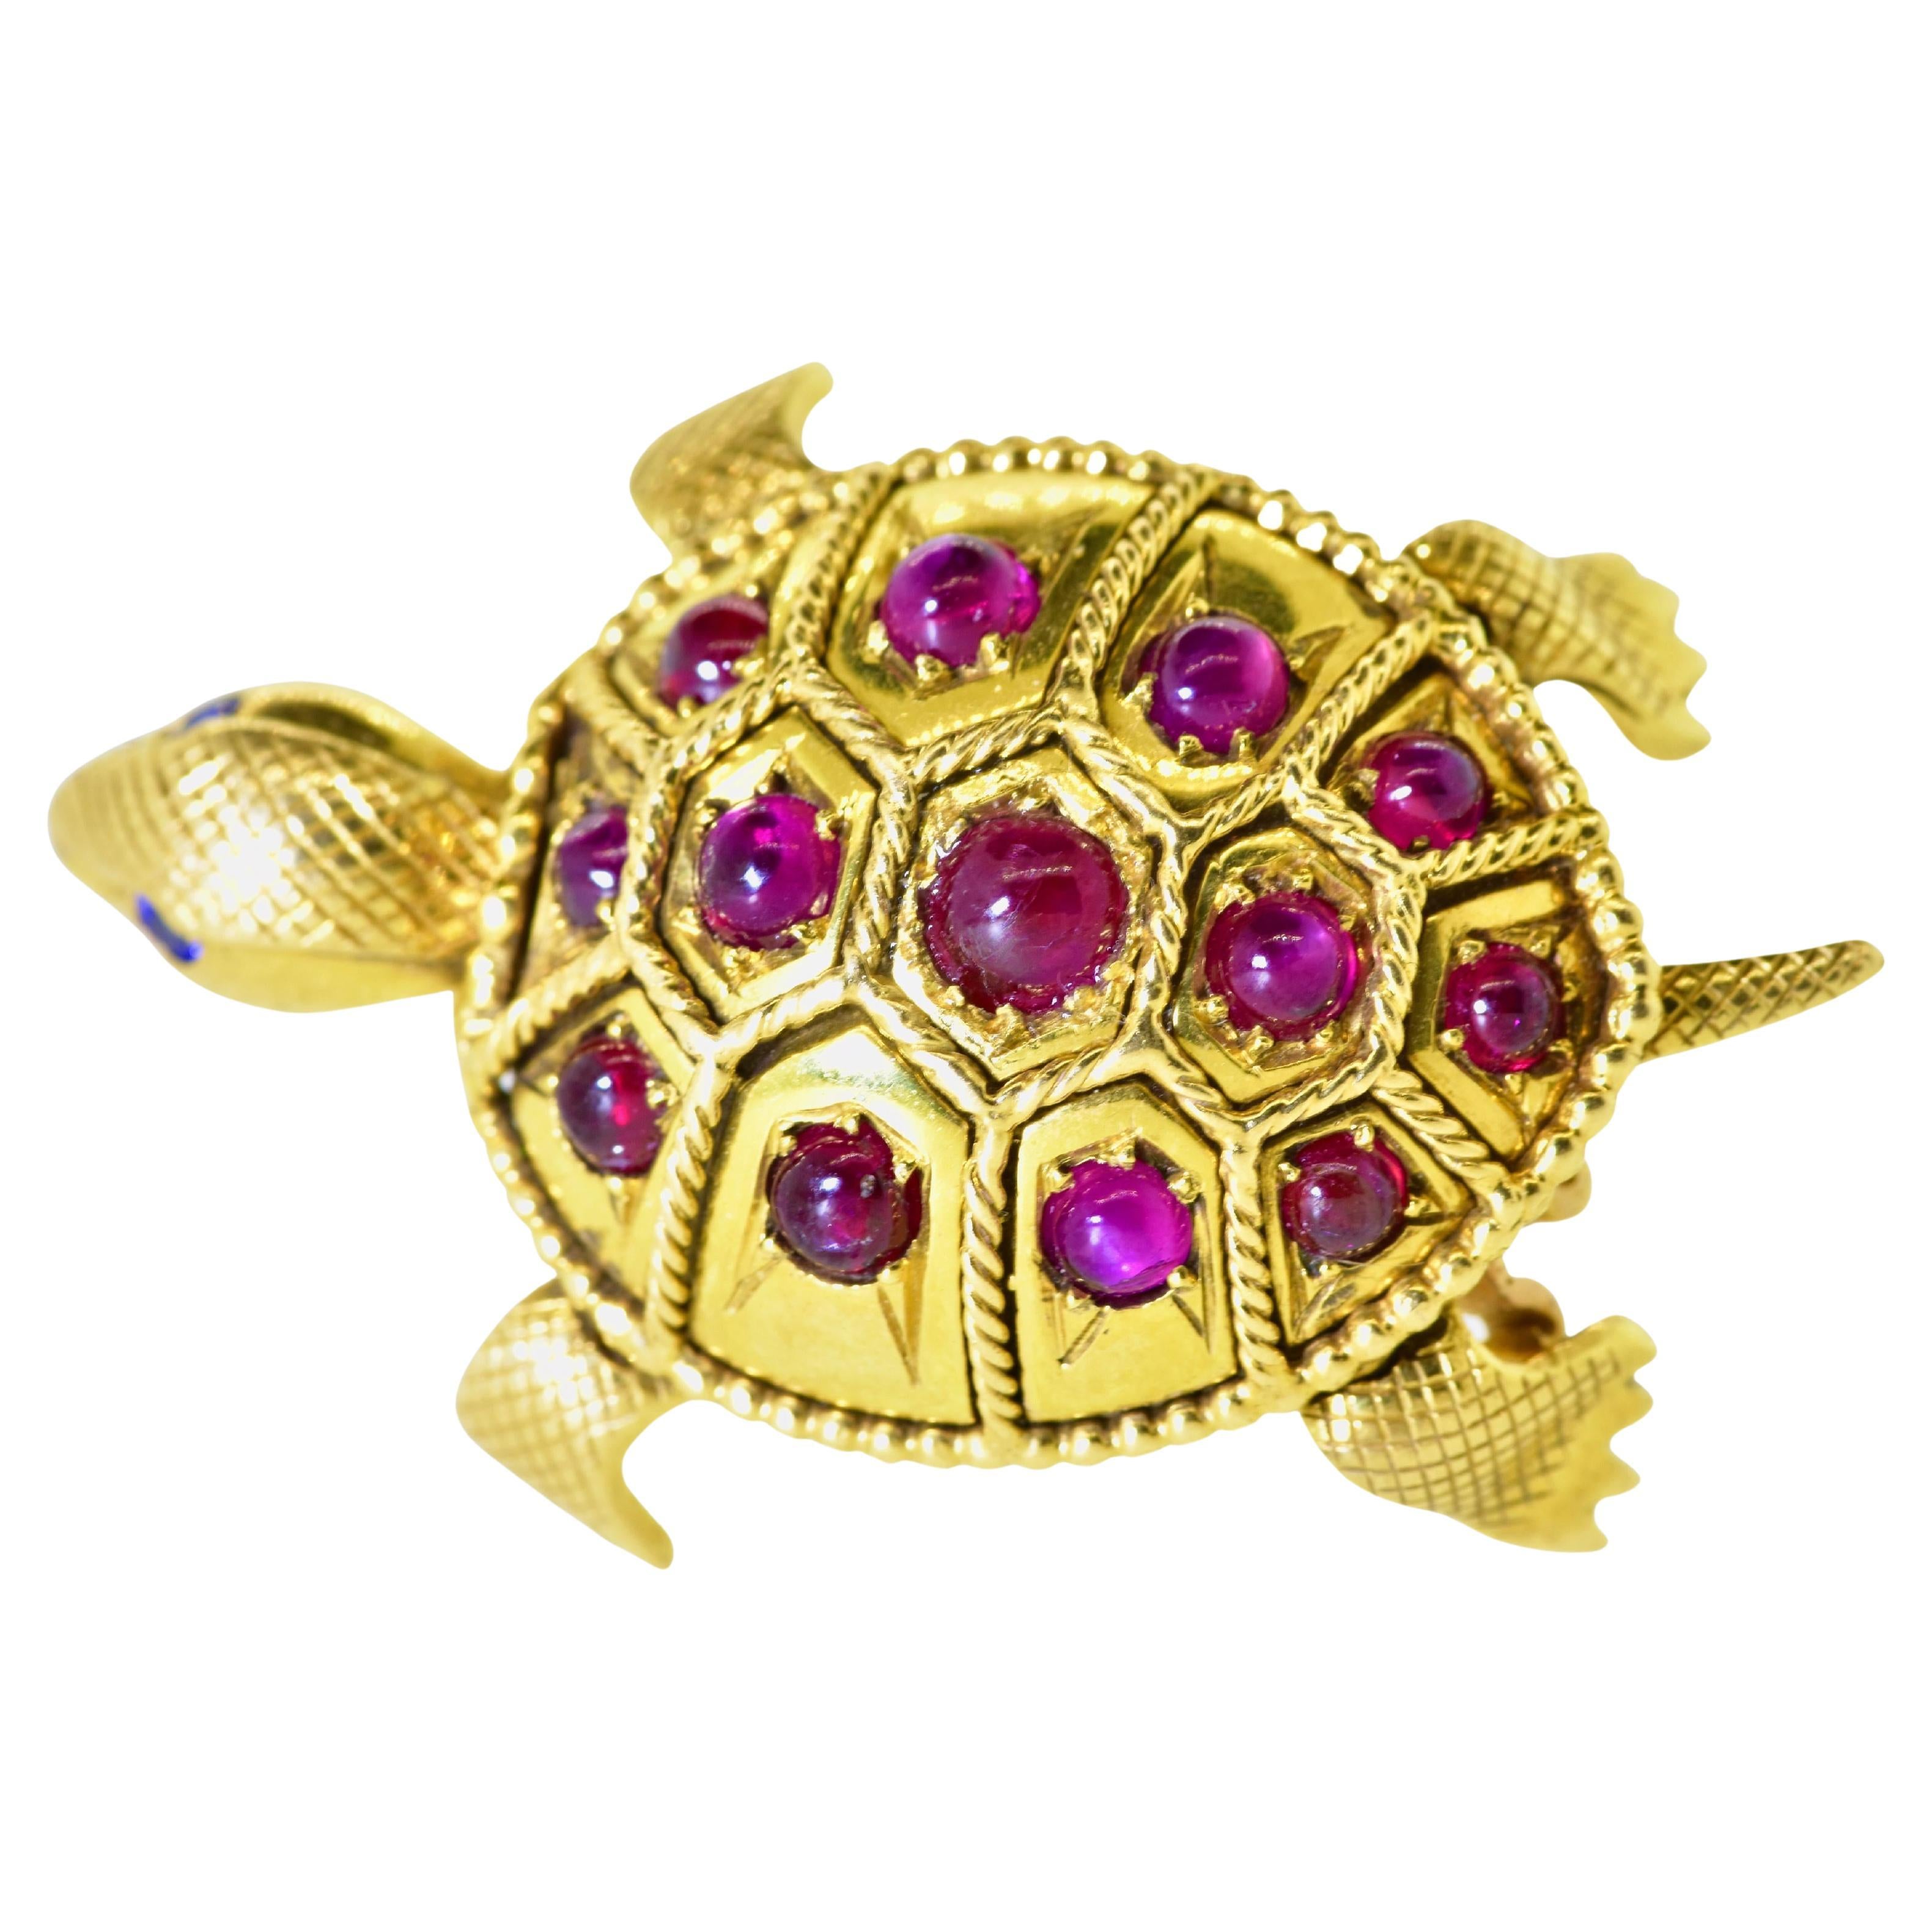 Cabochon French Turtle with Burma Ruby & 18K Yellow Gold Double Clip Brooch, C. 1950